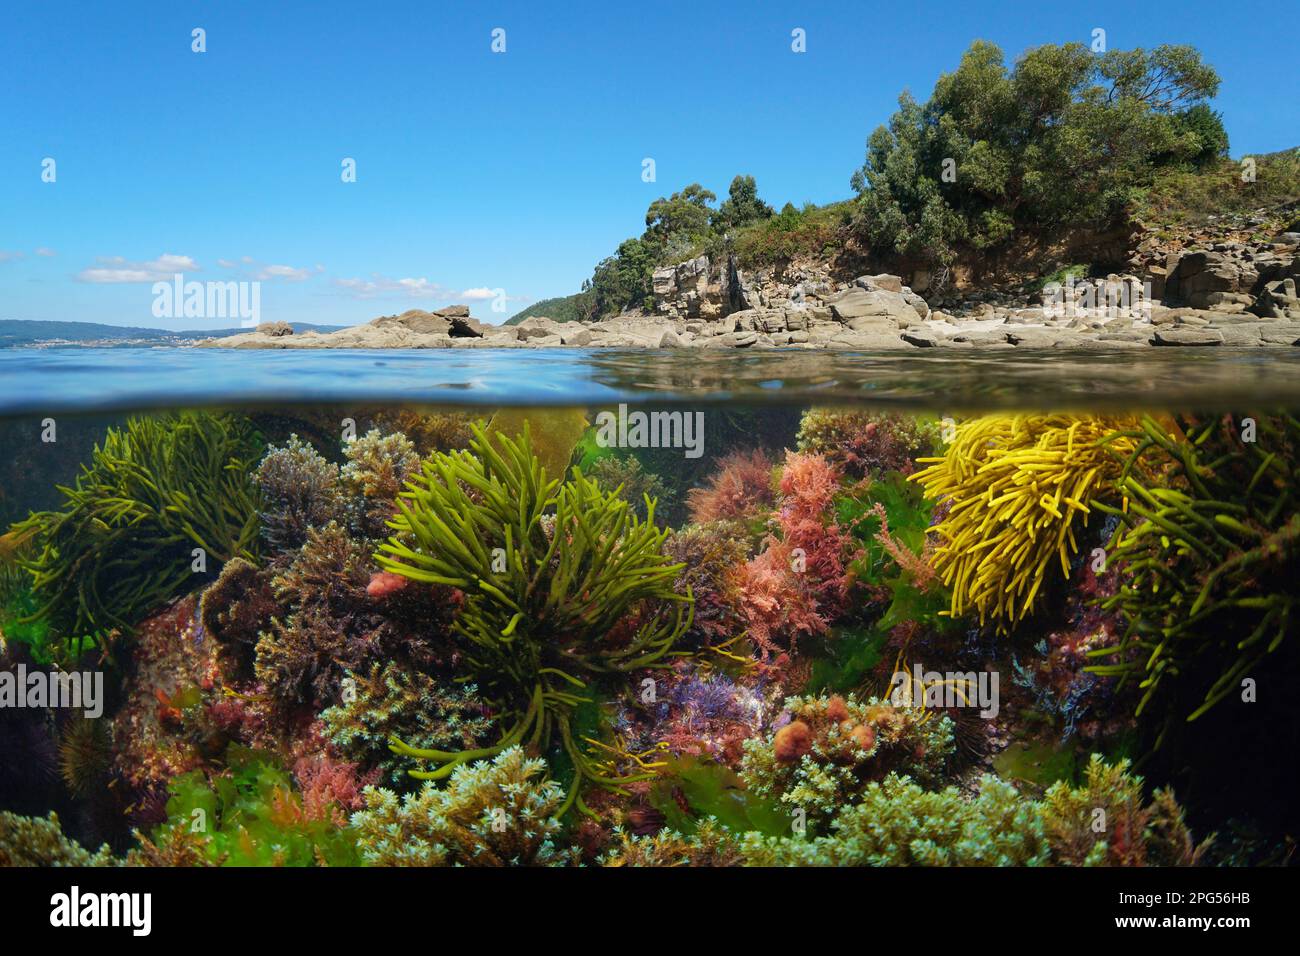 Seaweeds underwater and the coastline, Atlantic ocean, Spain, Galicia, split level view over and under water surface Stock Photo